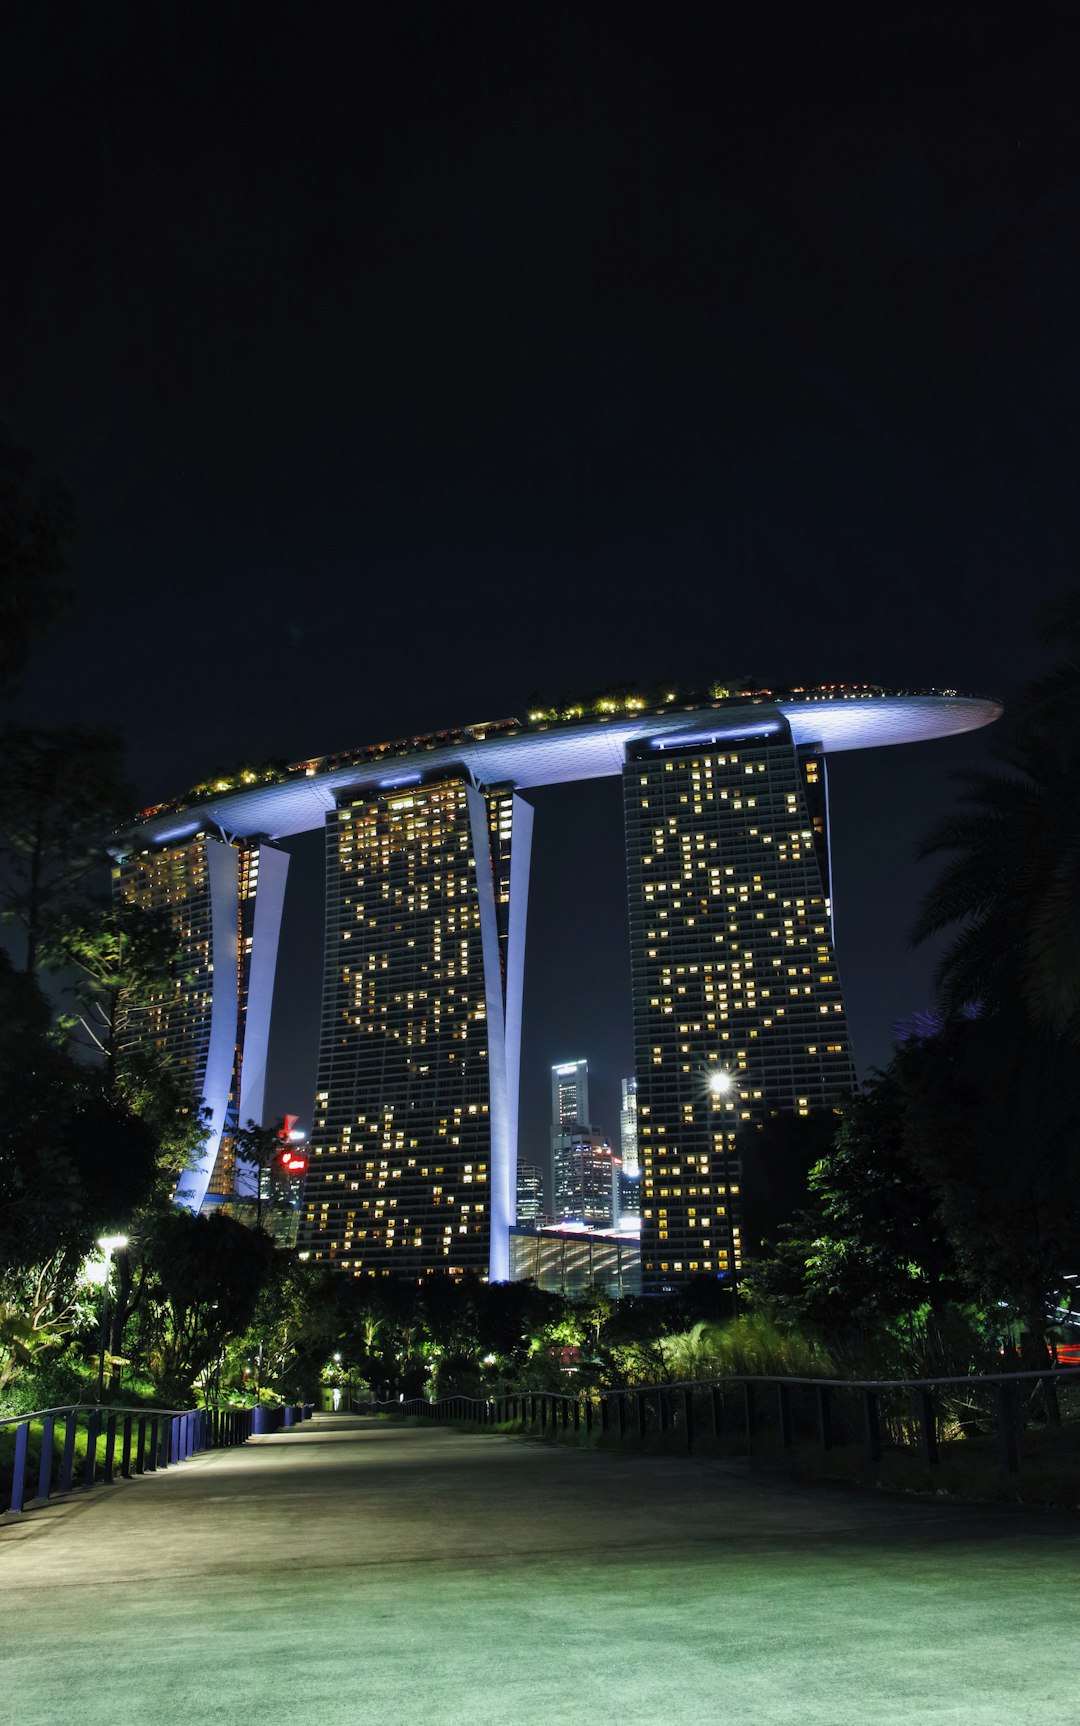 Travel Tips and Stories of Supertree Grove in Singapore